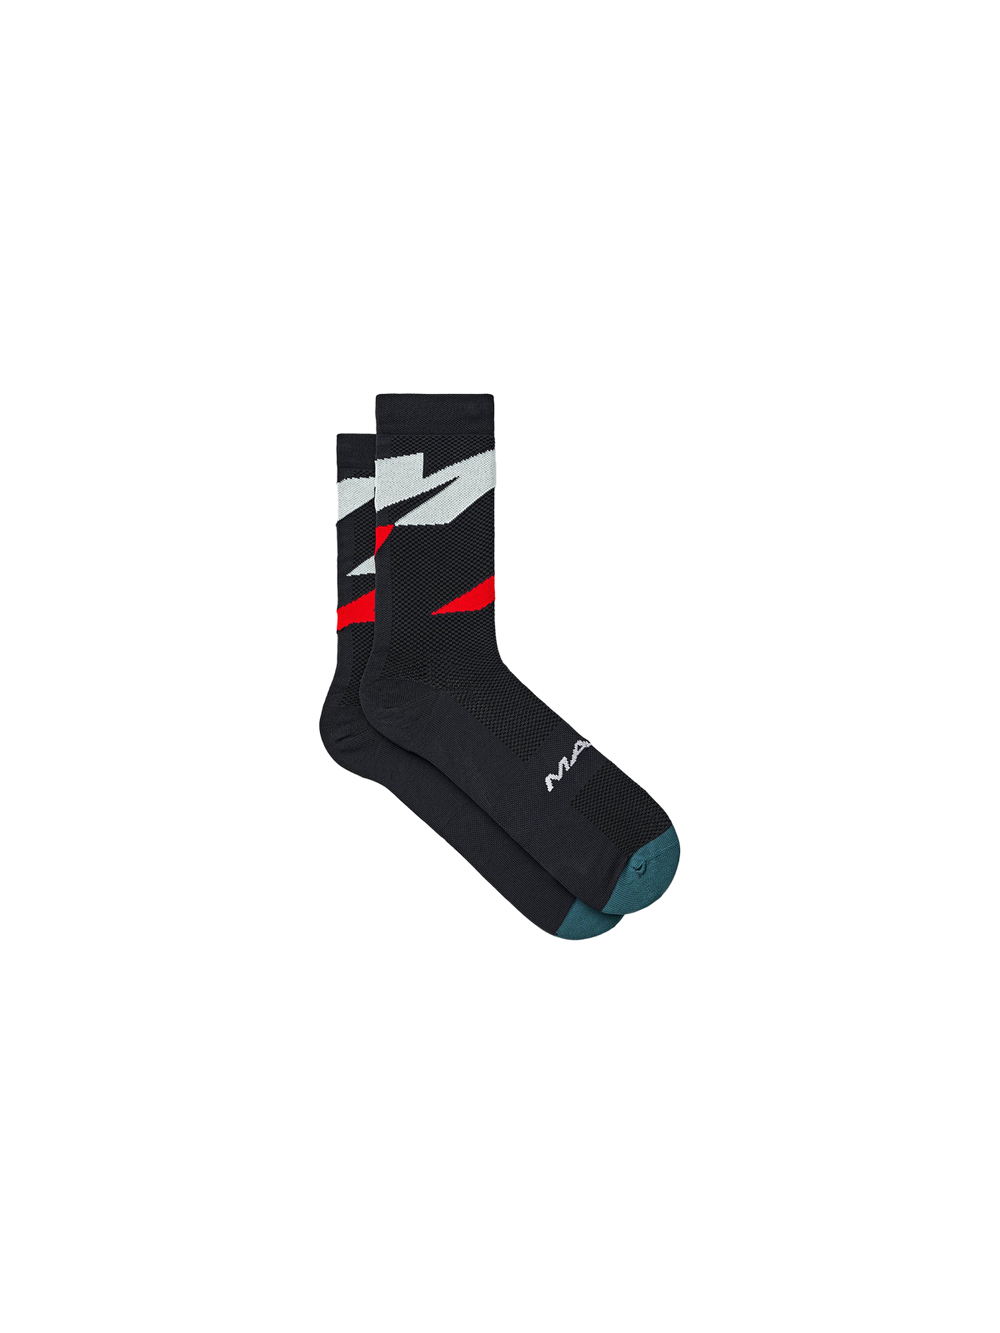 Product Image for Emerge Pro Air Sock